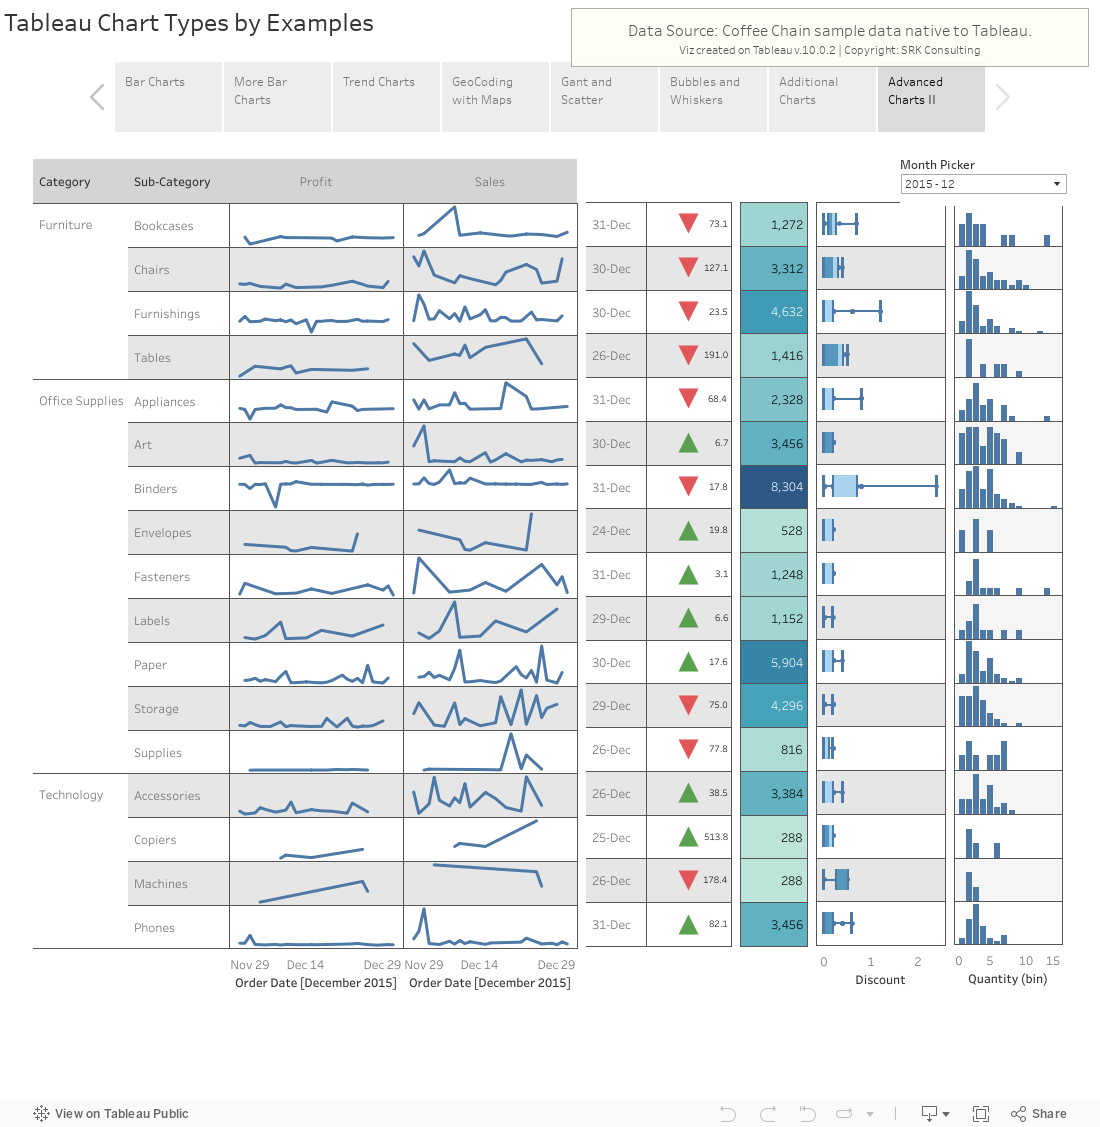 Tableau Chart Types by Examples 